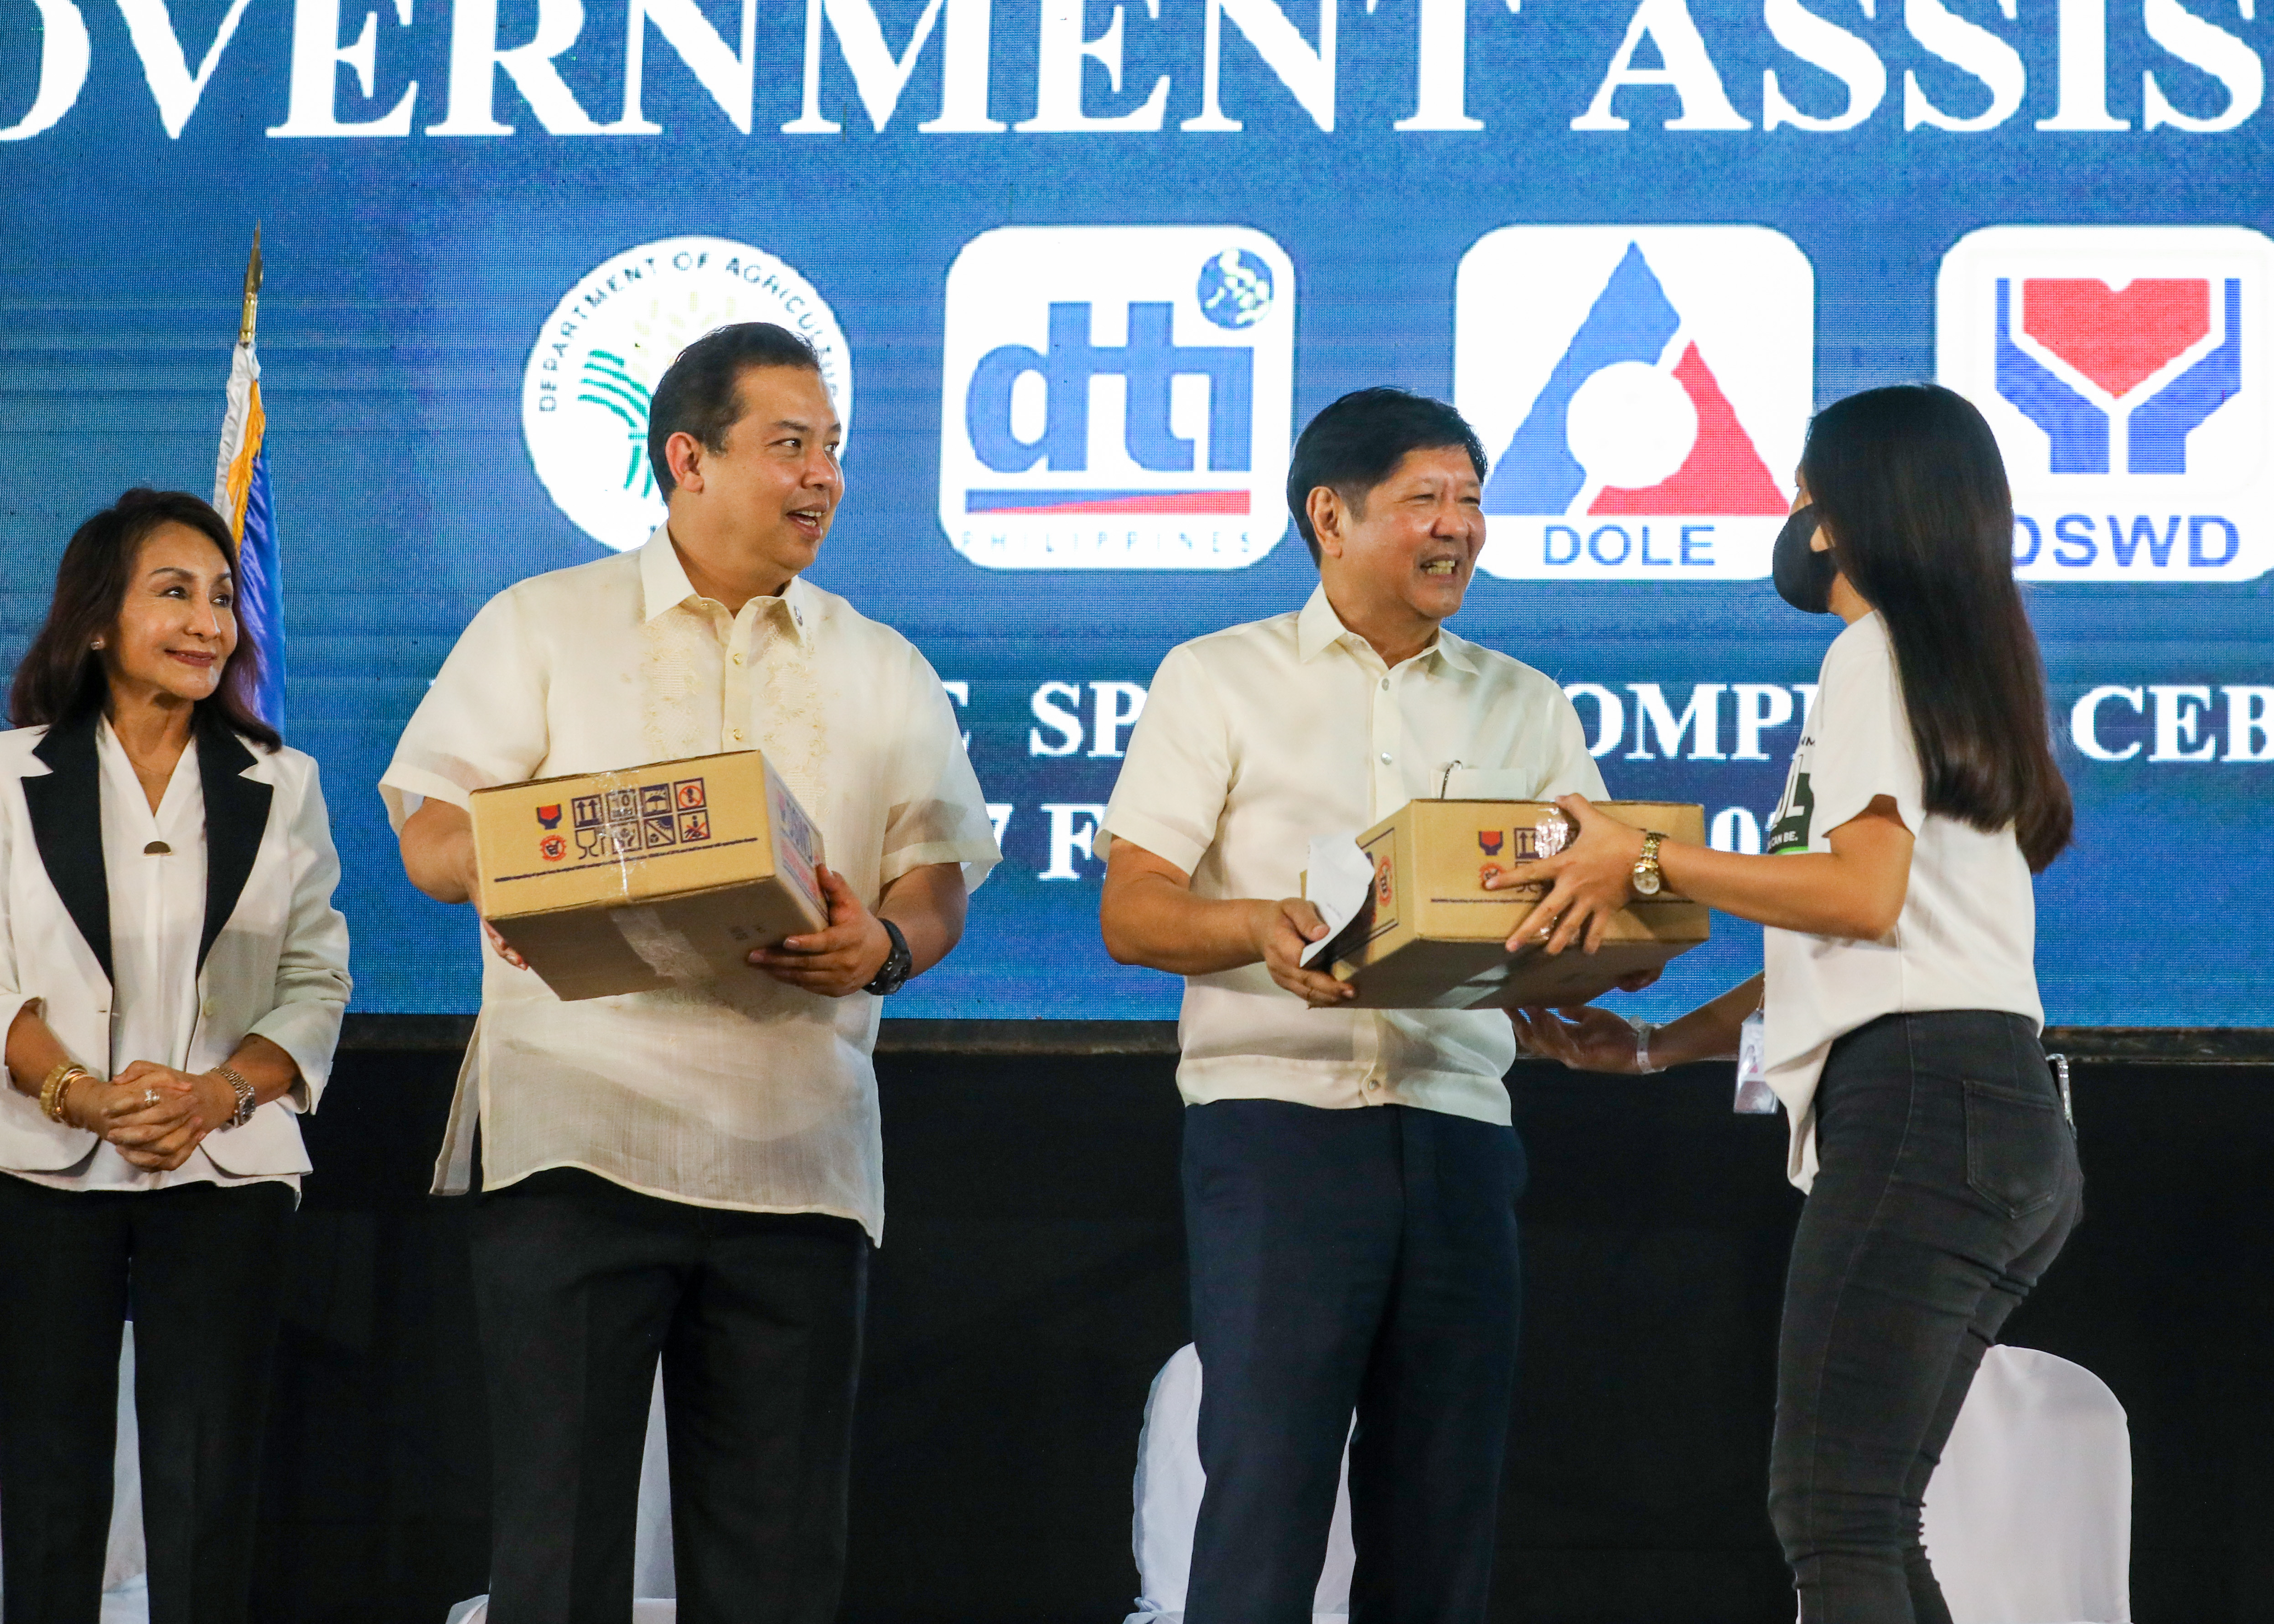 President Marcos distributes assistance in Cebu